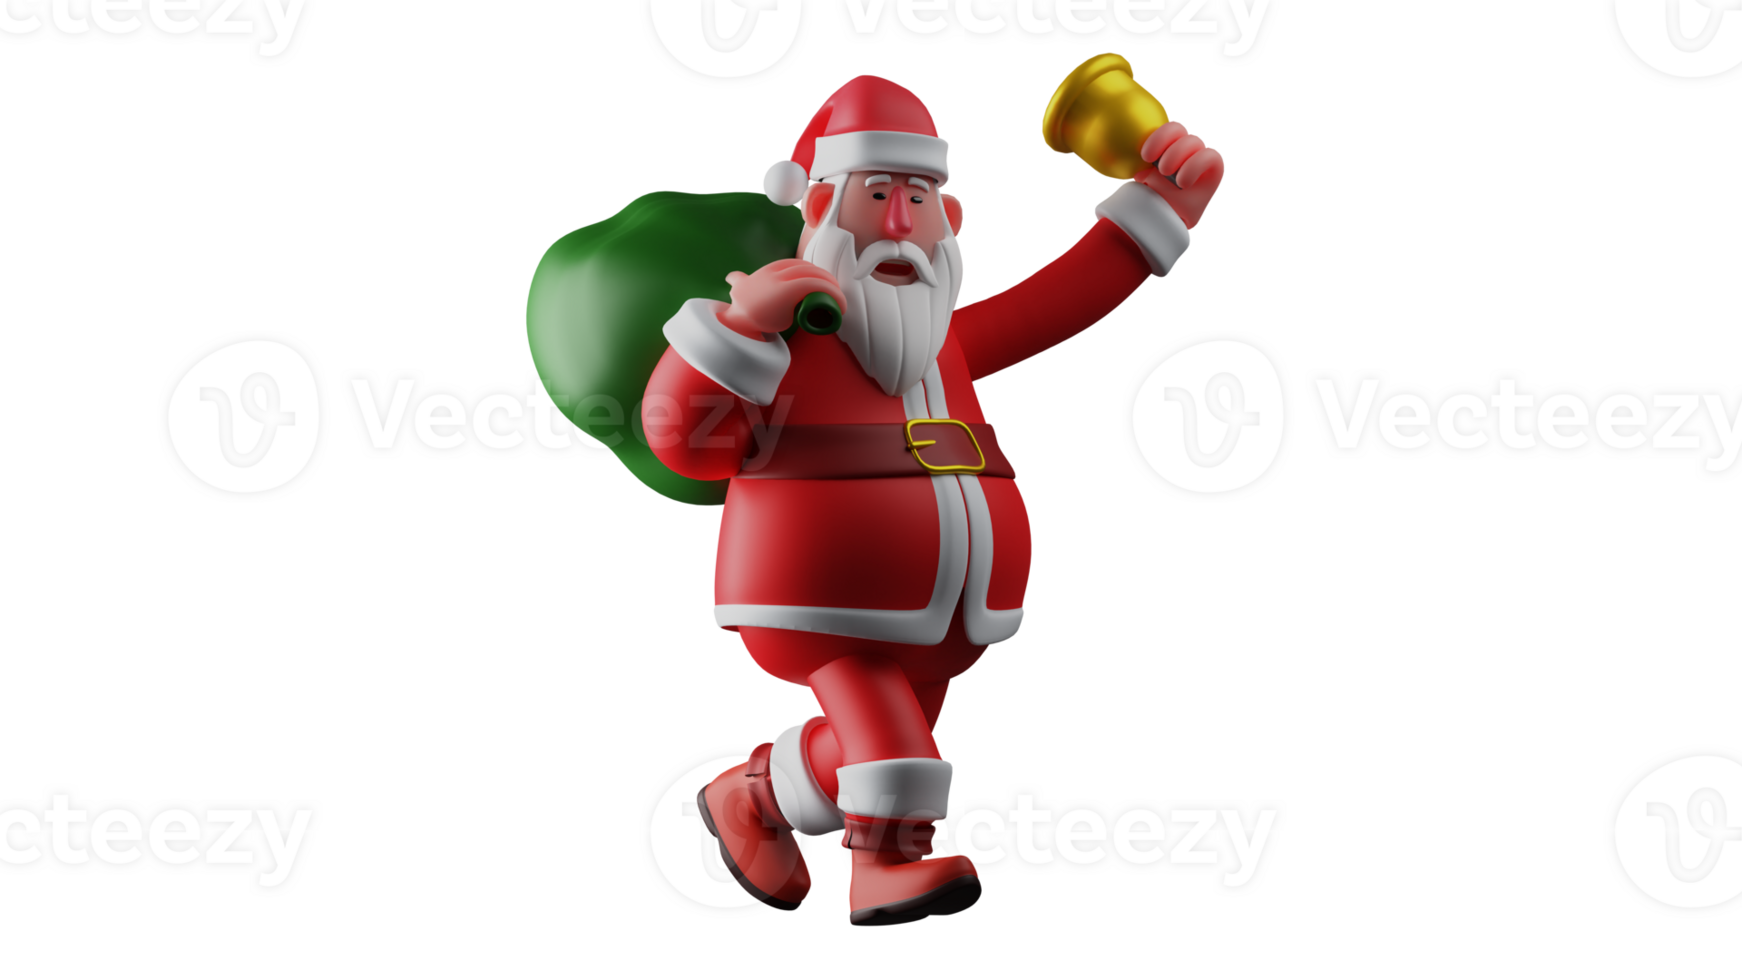 3D illustration. Happy Santa 3D Cartoon Character. Santa Claus walked towards the Christmas celebration while ringing the golden bell he was carrying. Santa carries a gift sack. 3D Cartoon Character png